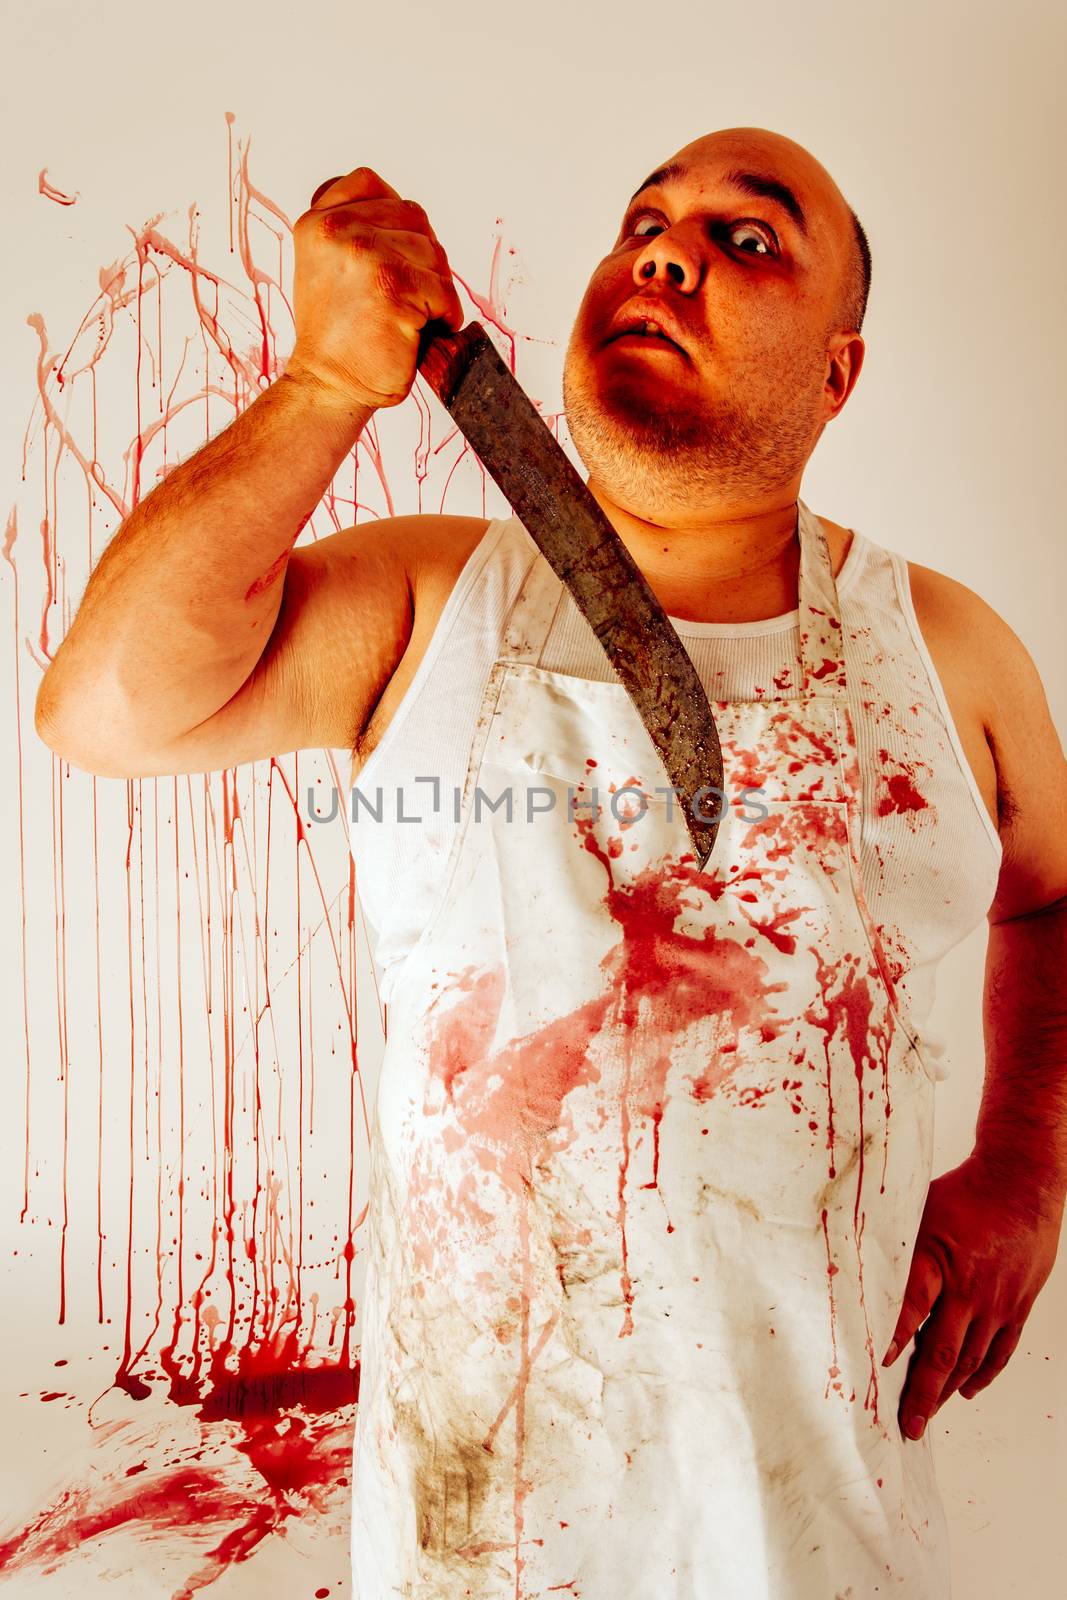 Crazy insane butcher covered with blood.  Harsh lighting for more disturbing feel.